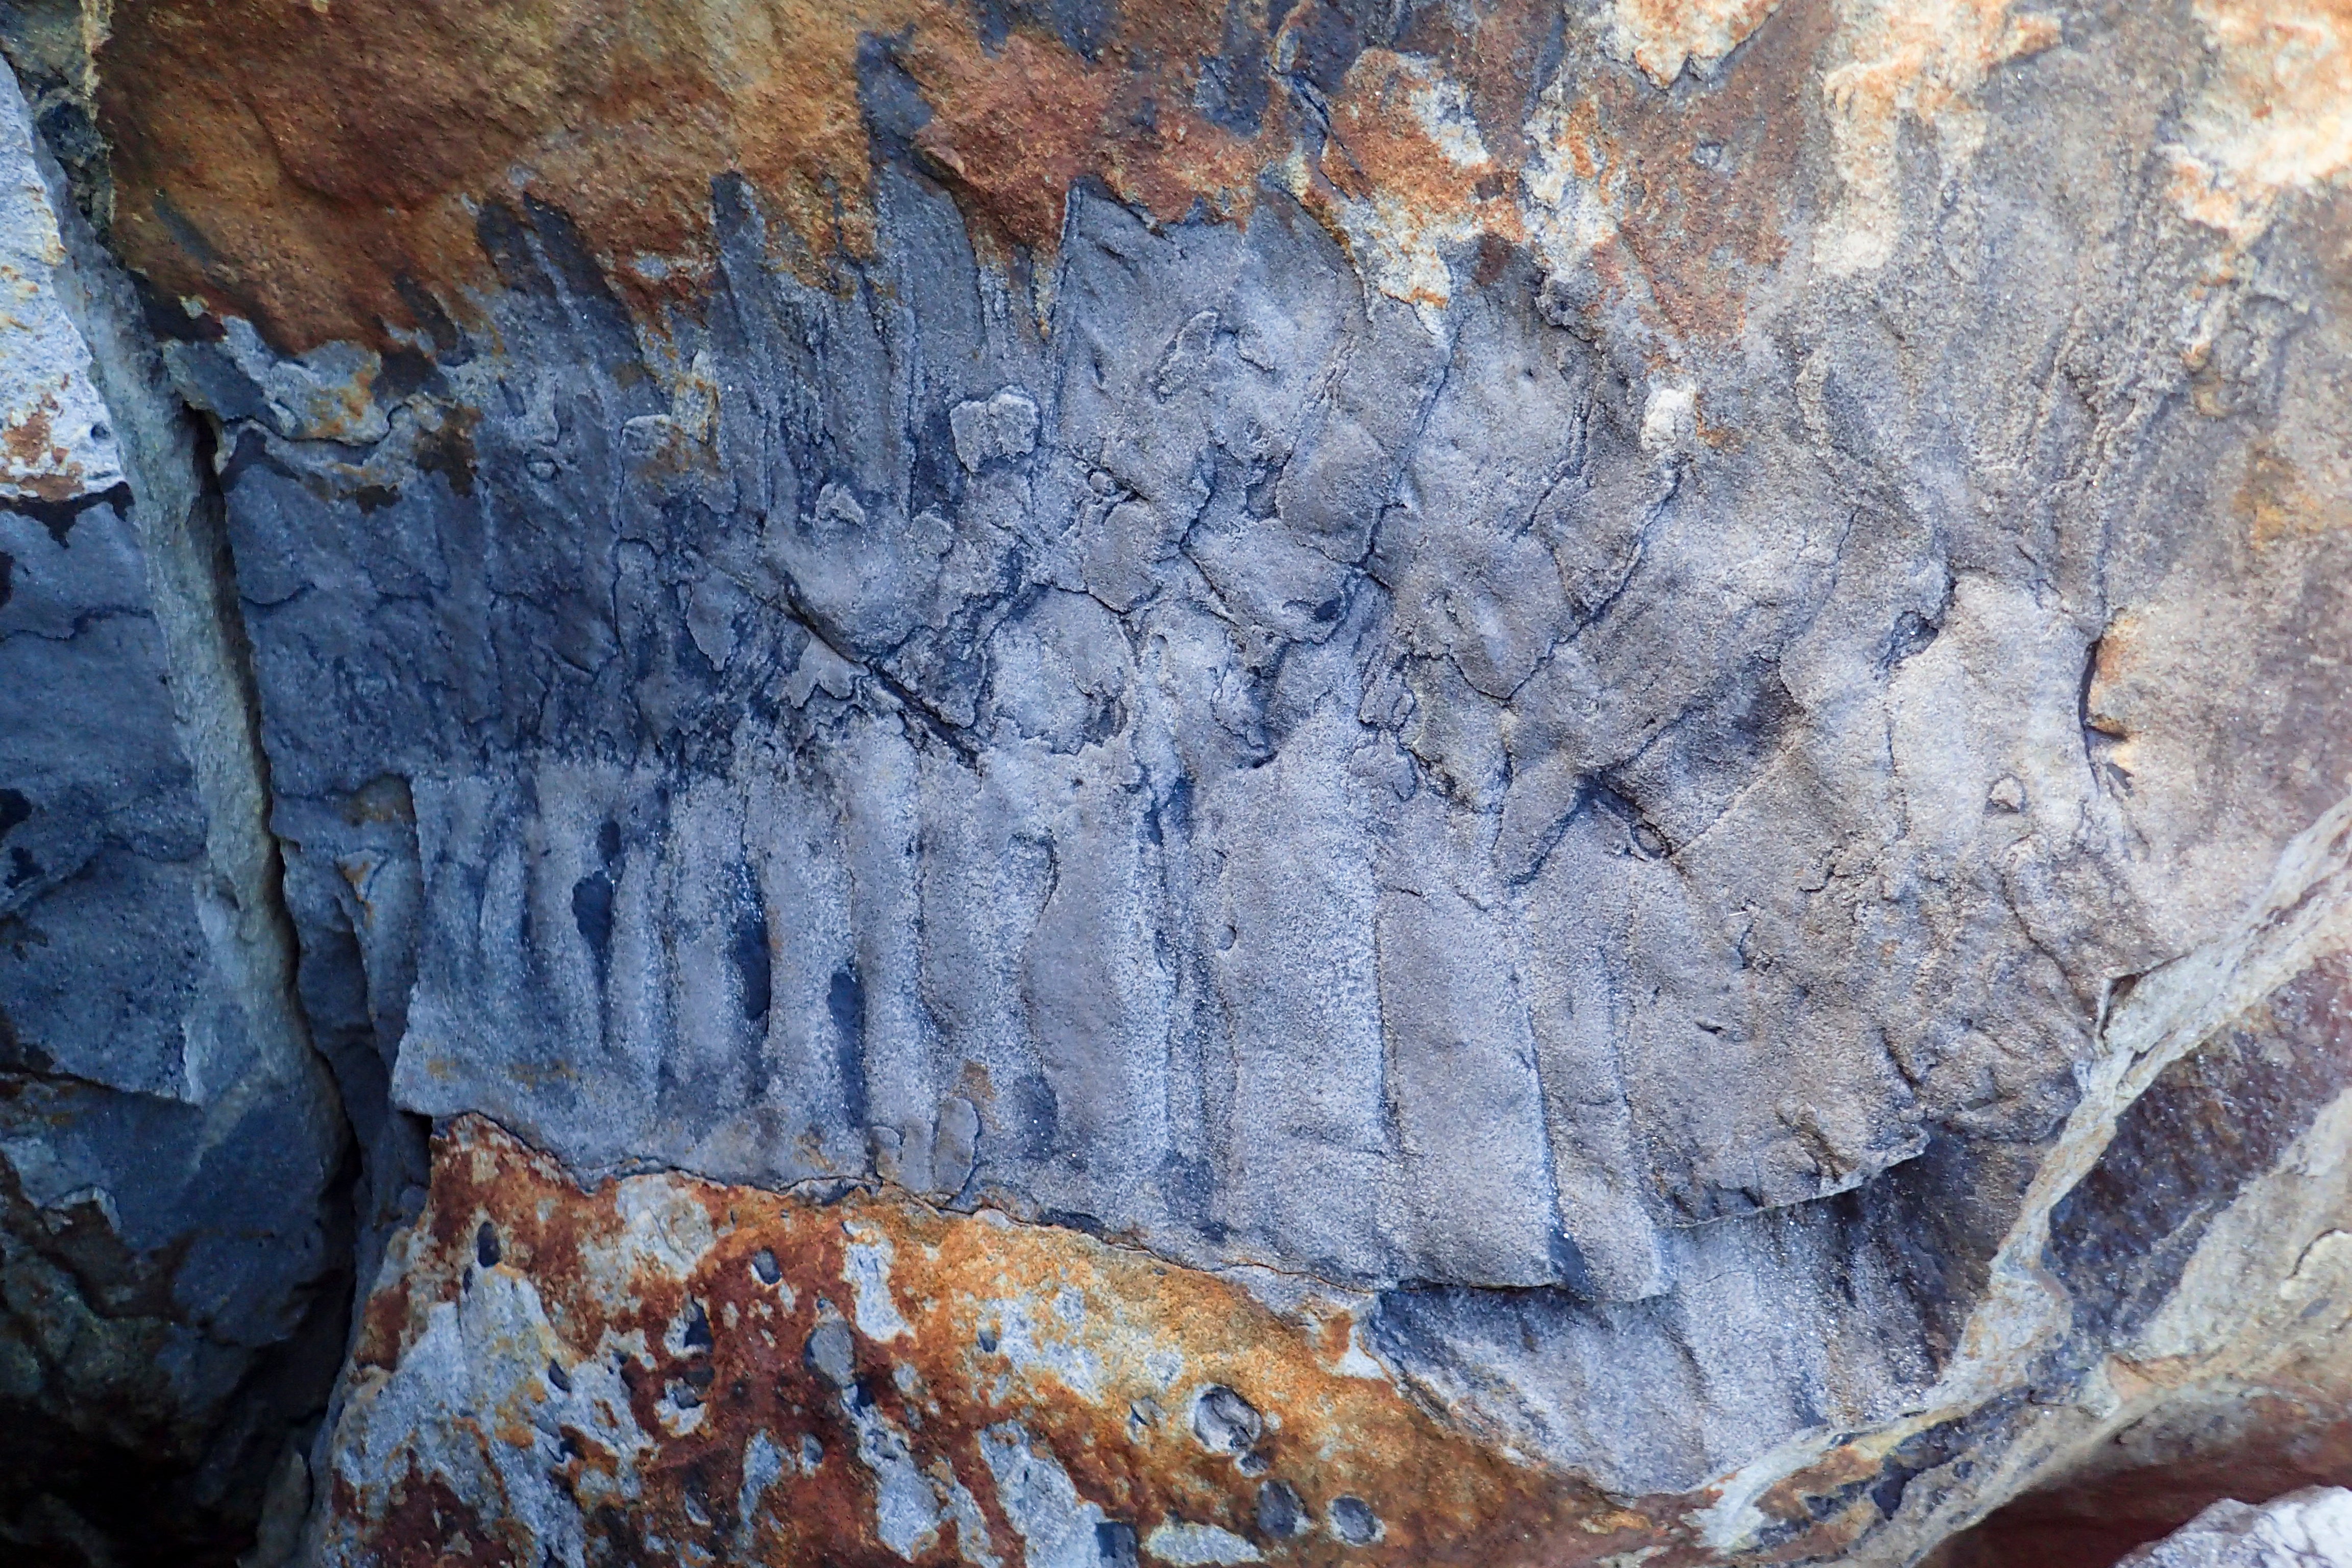 The fossil itself, found in a sandstone boulder on a beach 40 miles north of Newcastle